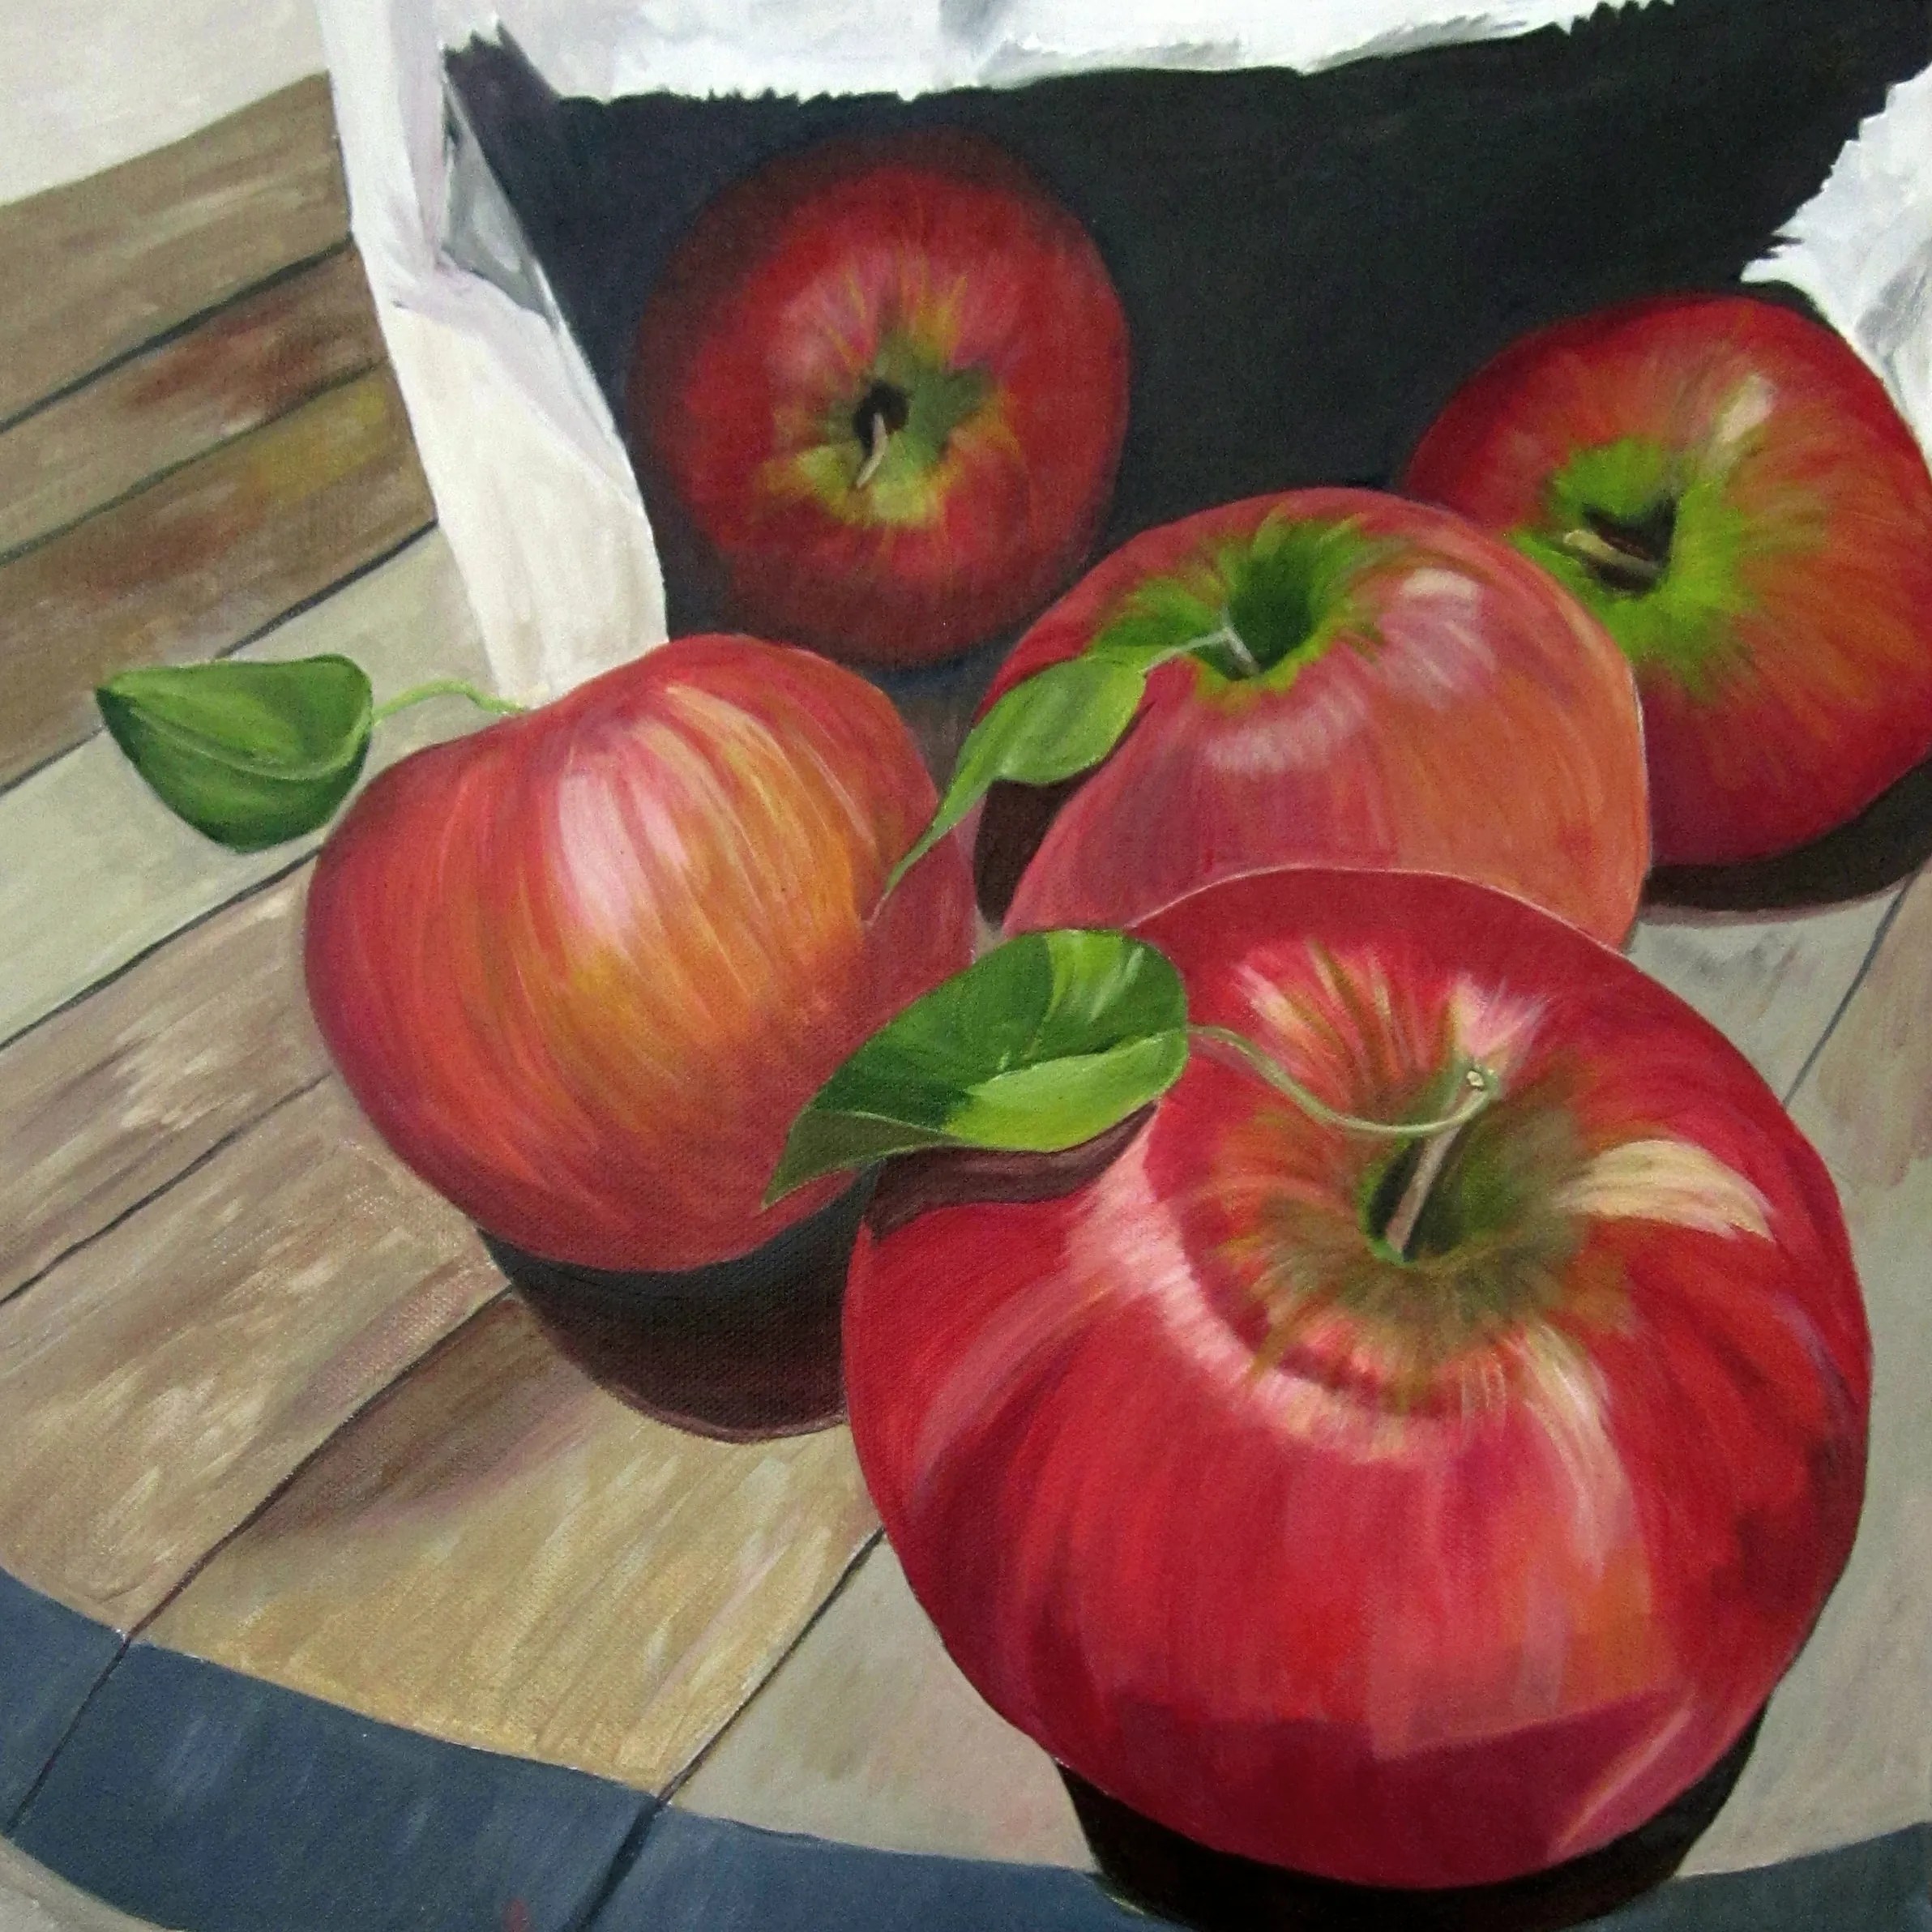 acrylic painting of red delicious apples by artist Shona Jones